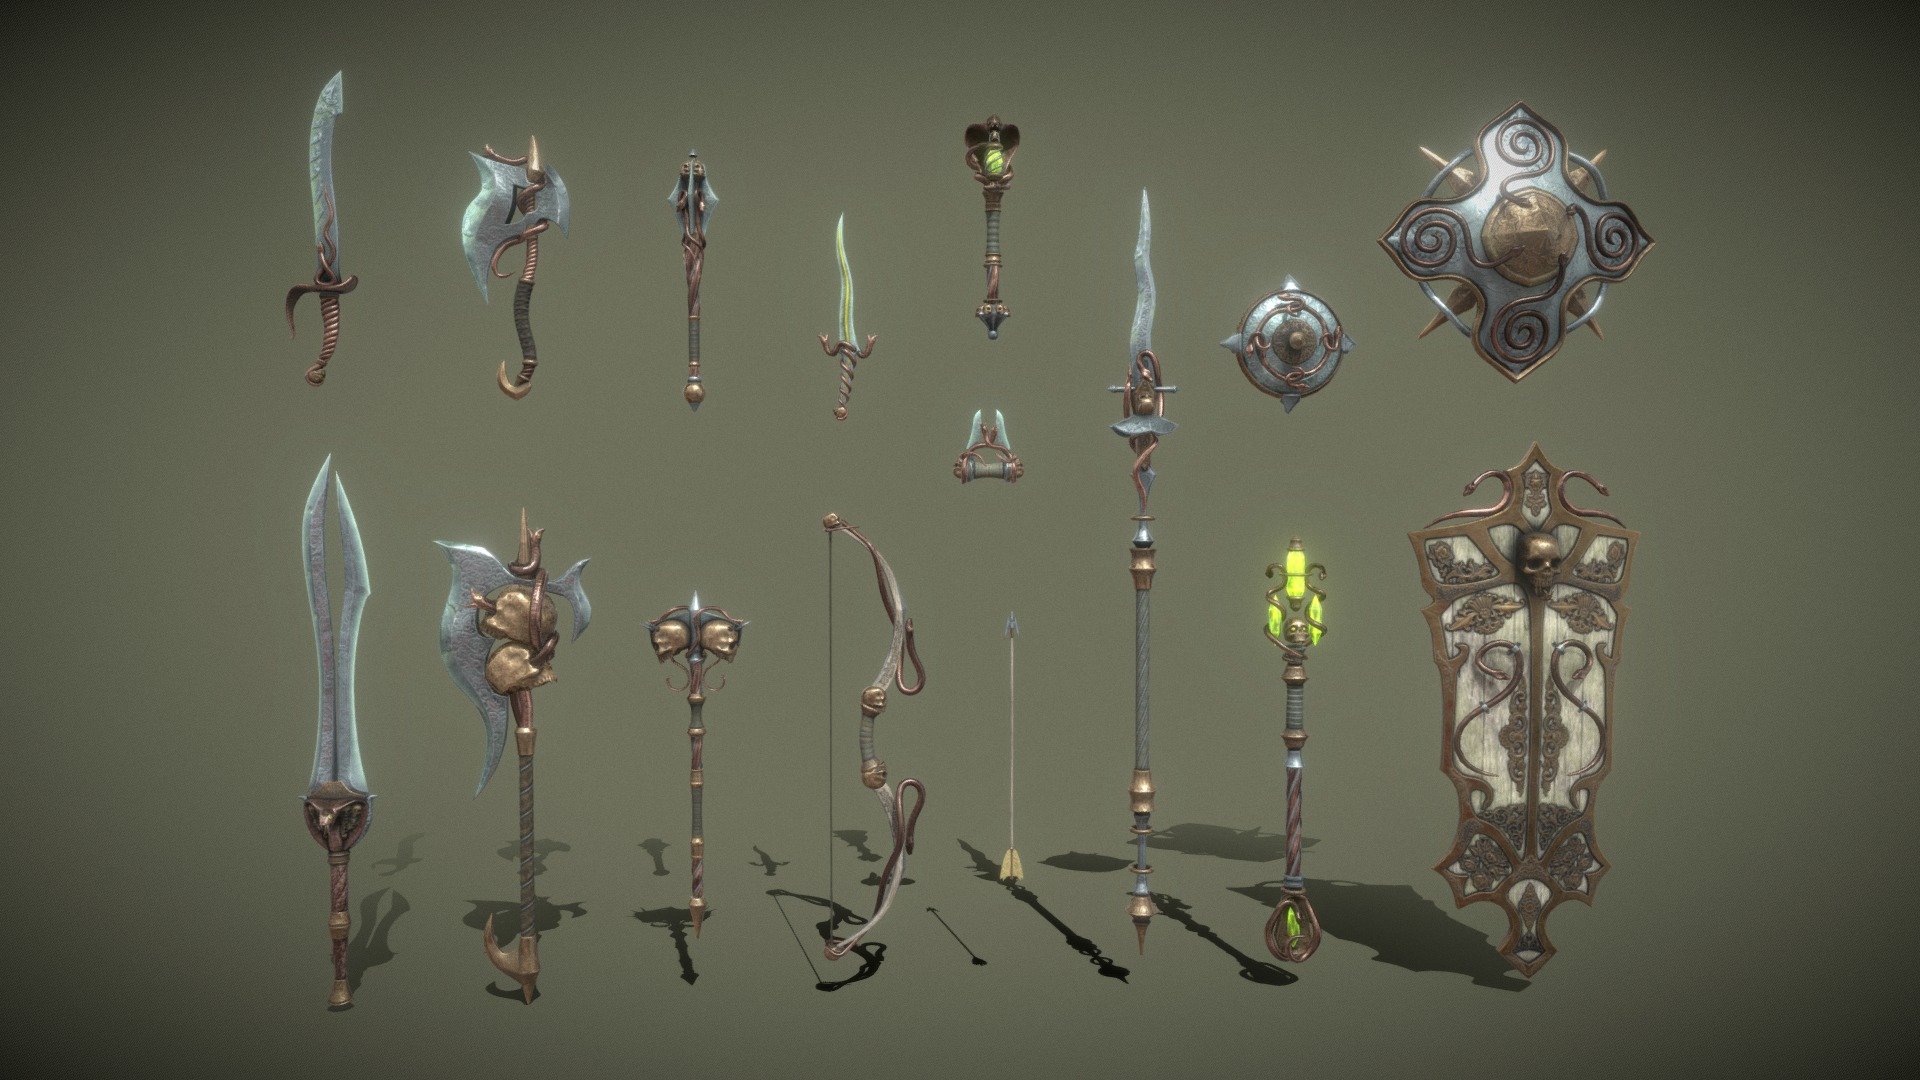 A set of fantasy Snake weapons.

The set consists of sixteen unique objects.

PBR textures have a resolution of 2048x2048.

Total polygons: 99624 triangles; 50780 vertices.

1) Sword (one-handed) - 4056 tris

2) Sword (two-handed) - 4978 tris

3) Mace (one-handed) - 4892 tris

4) Mace (two-handed) - 8272 tris

5) Ax (one-handed) - 4088 tris

6) Ax (two-handed) - 7034 tris

7) Lance - 6698 tris

8) Dagger - 4524 tris

9) Brass knuckles - 4188 tris

10) Bow - 6068 tris

11) Staff - 6096 tris

12) Scepter - 9606 tris

13) Shield (small) - 4824 tris

14) Shield (medium) - 11992 tris

15) Shield (great) - 10694 tris

16) Arrow - 654 tris

Archives with textures contain:

PNG textures for blender - base color, metallic, normal, roughness, opacity, glow

Texturing Unity (Metallic Smoothness) - AlbedoTransparency, MetallicSmoothness, Normal, Emission

Texturing Unreal Engine - BaseColor, Normal, OcclusionRoughnessMetallic, Emissive - Fantasy Snake Weapon Set - 3D model by zilbeerman 3d model